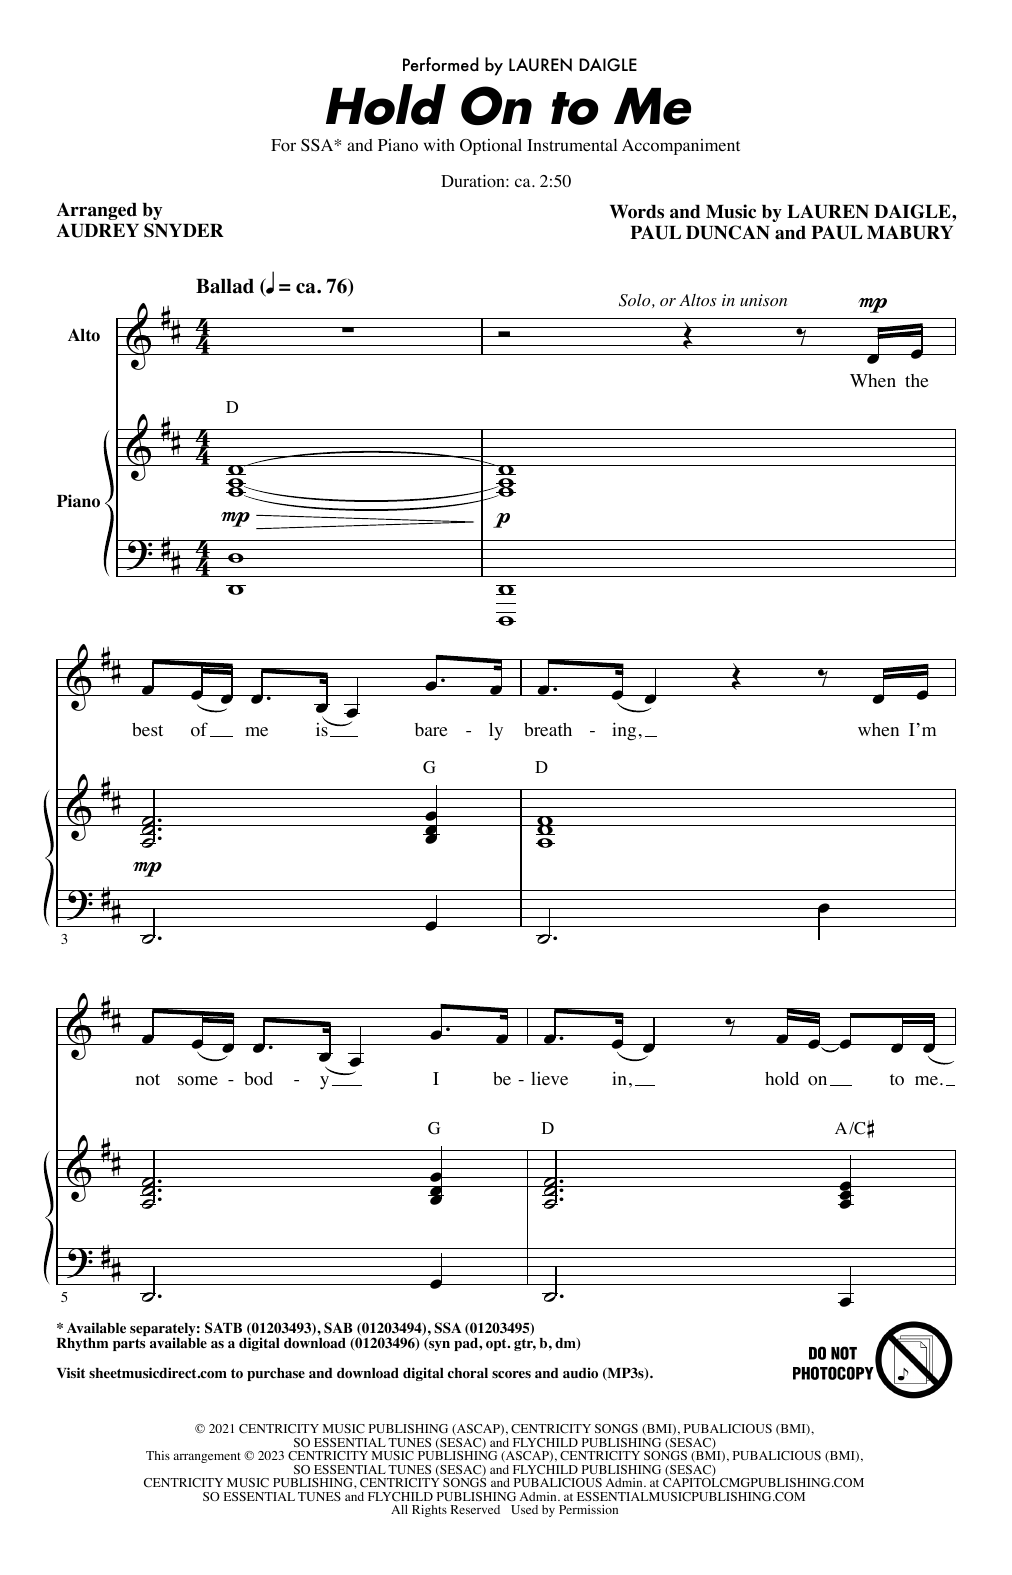 Download Lauren Daigle Hold On To Me (arr. Audrey Snyder) Sheet Music